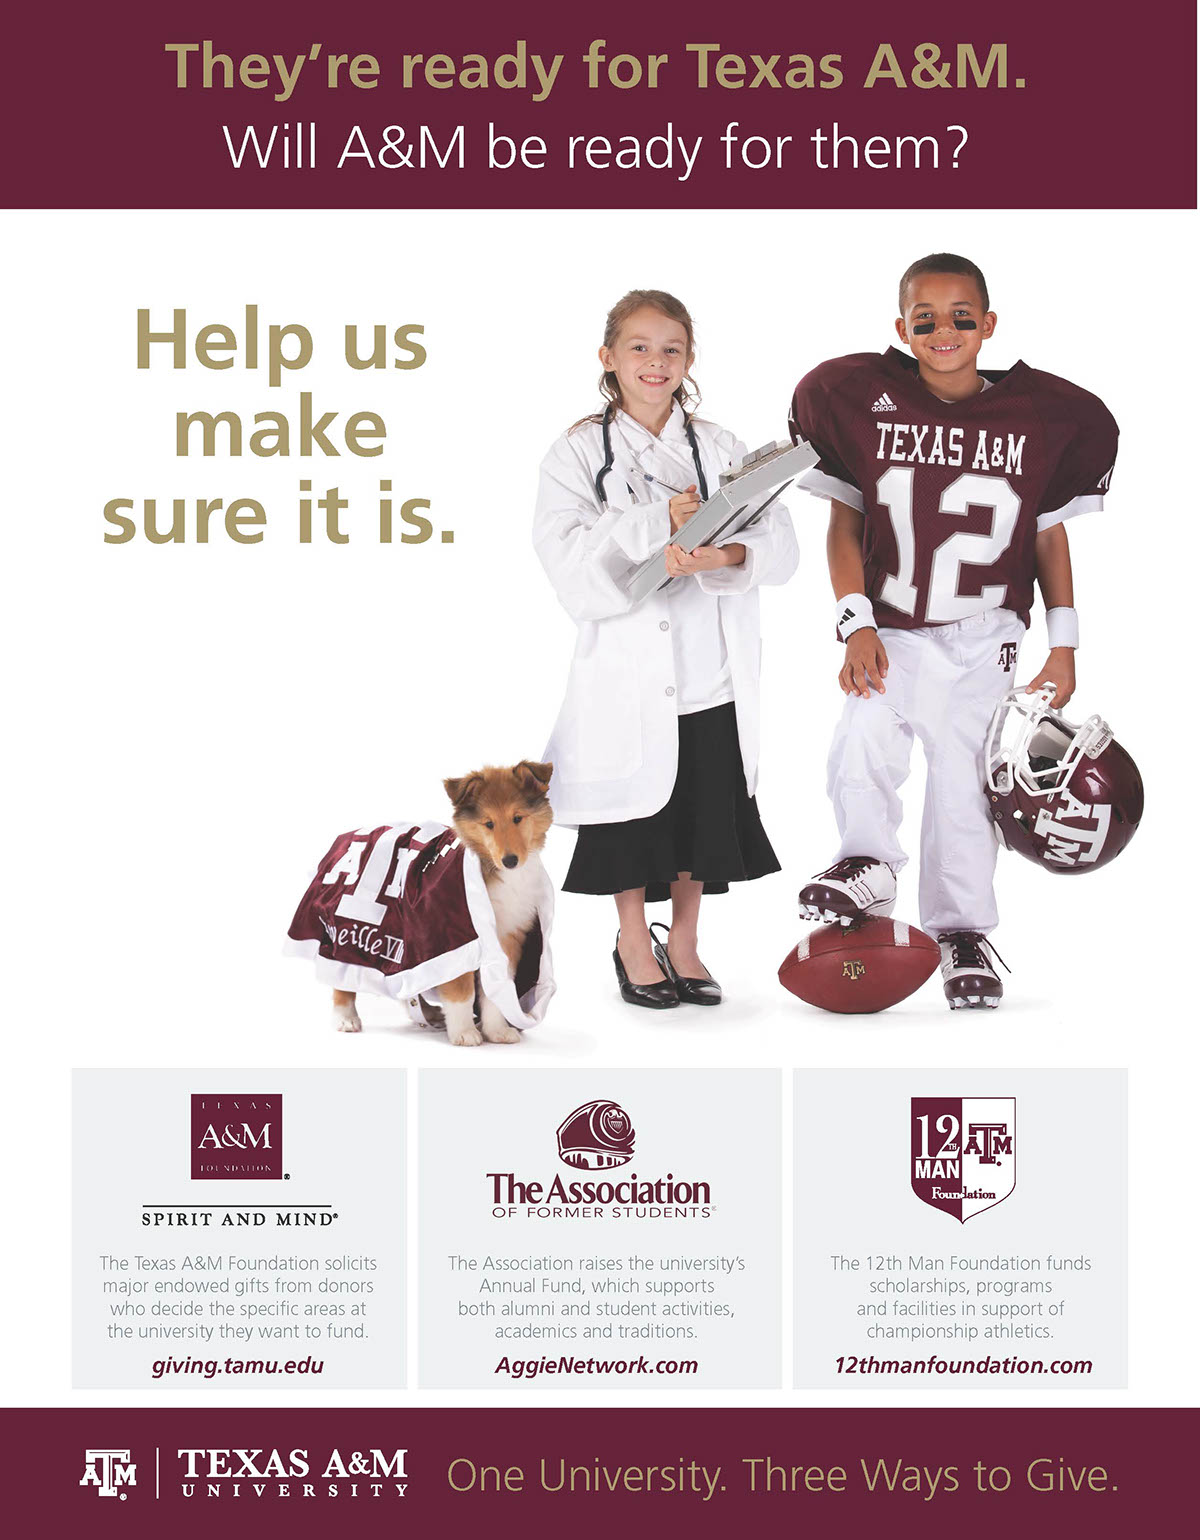 texas a&m Philanthropy  fundraising John Zollinger higher education brand management foundation donor relations giving